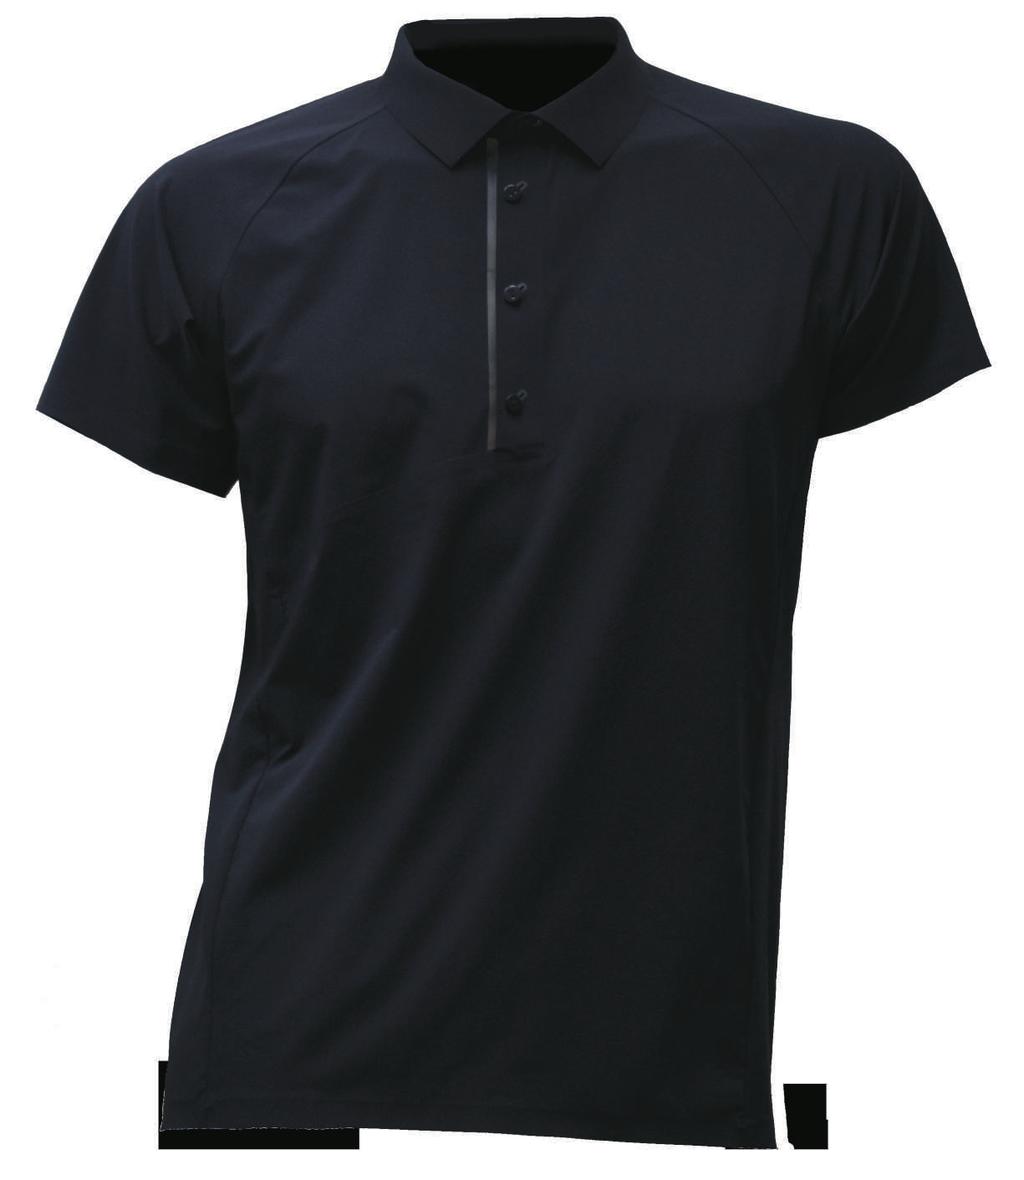 * M s golf shirt with stretch fabric provide a better fit * Welded placket at